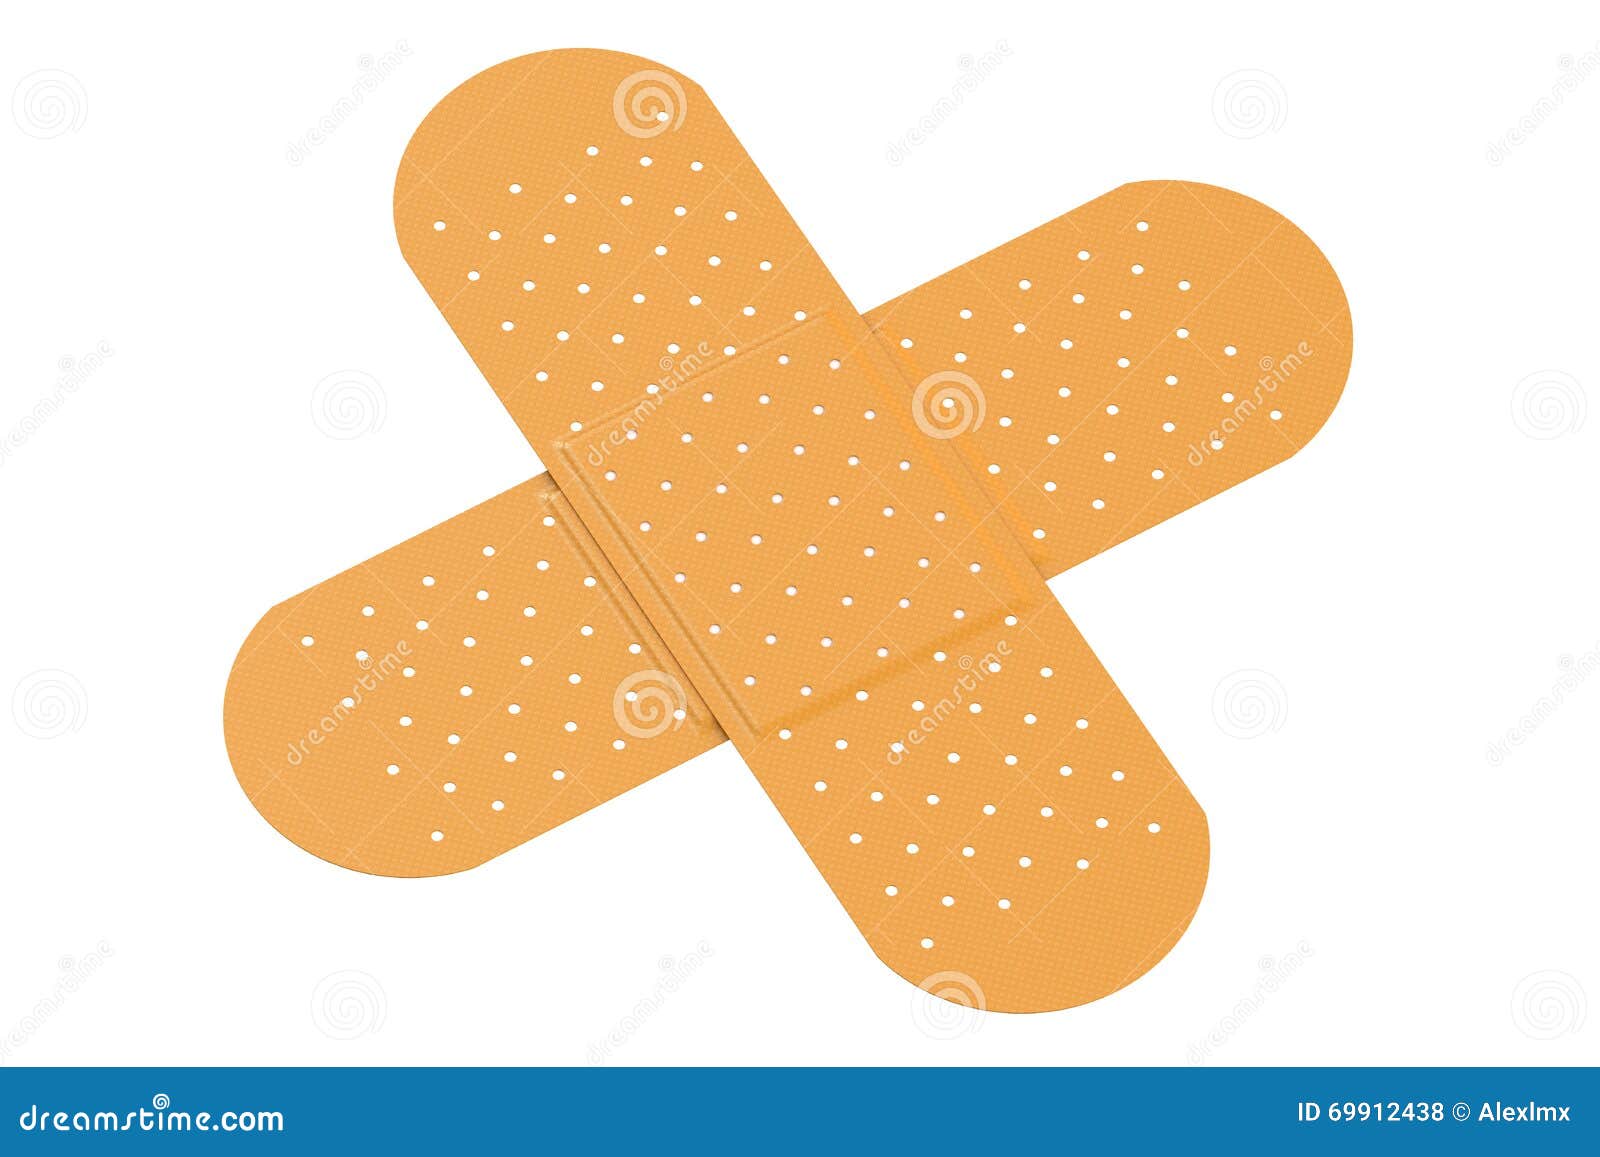 Adhesive Bandages Set In Different Shape Isolated On White Background ...